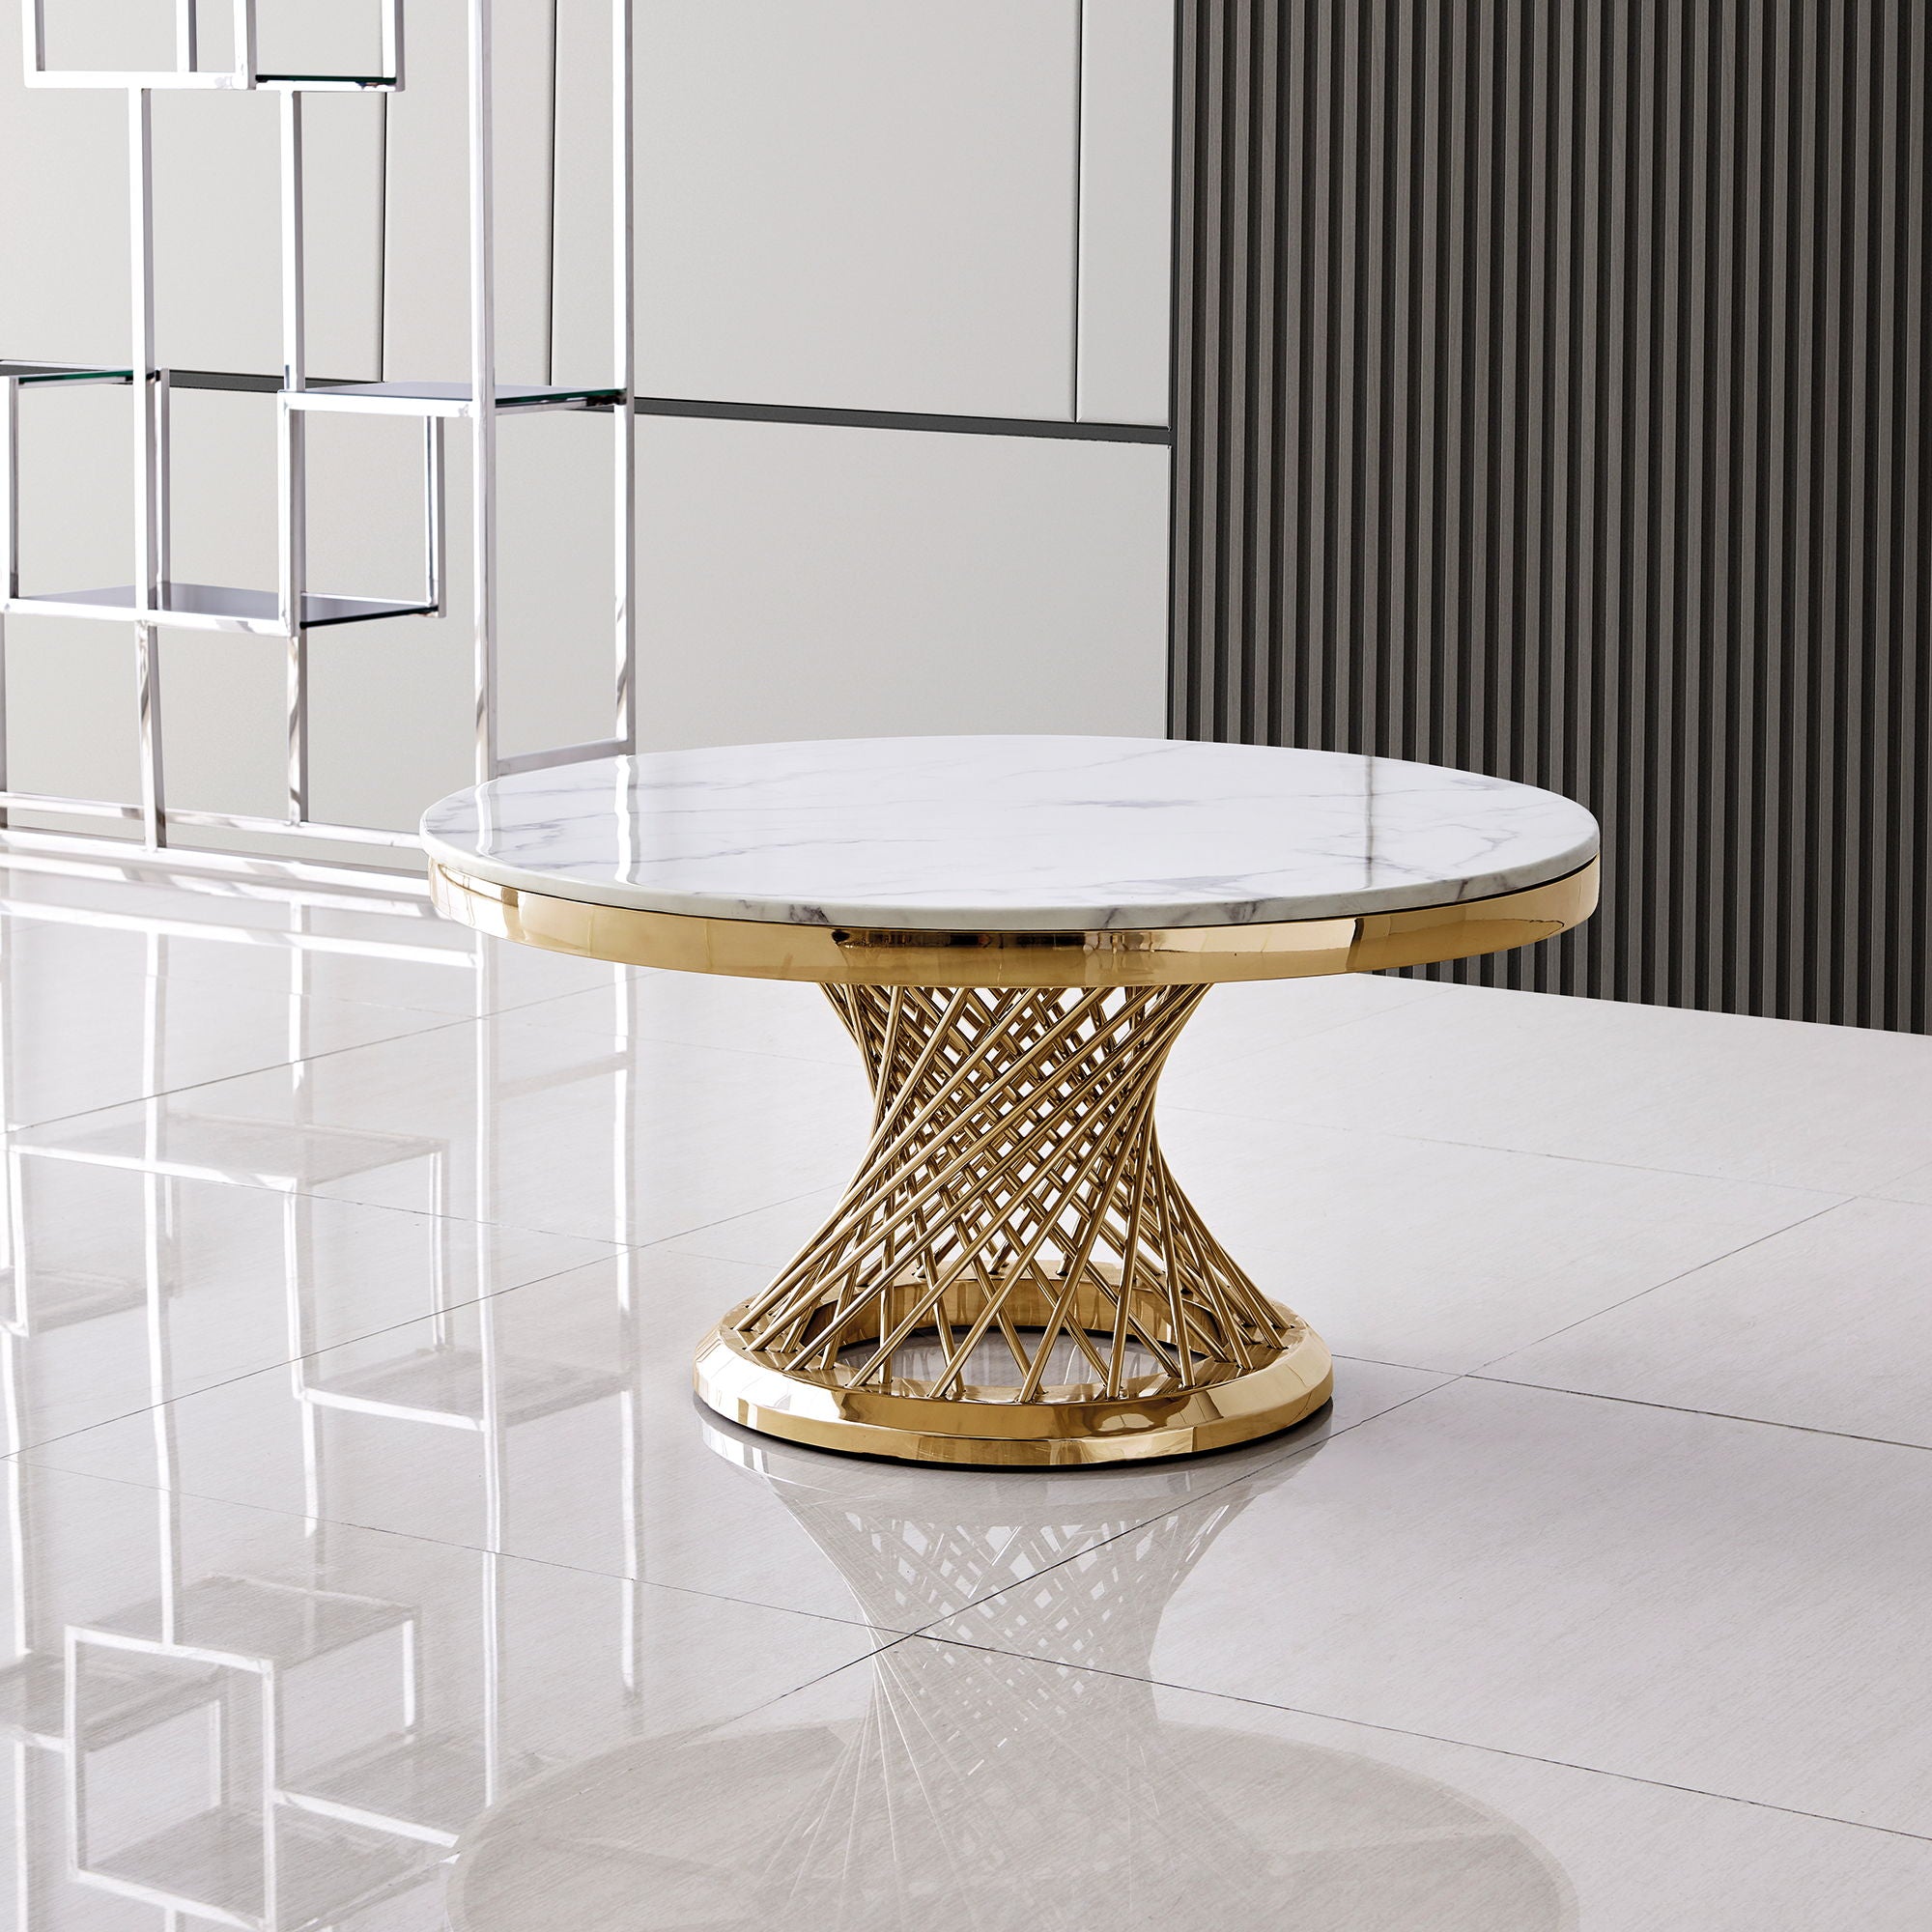 Luxurious Design Marble Round Coffee Table With Gold Mirrored Finish Stainless Steel Base